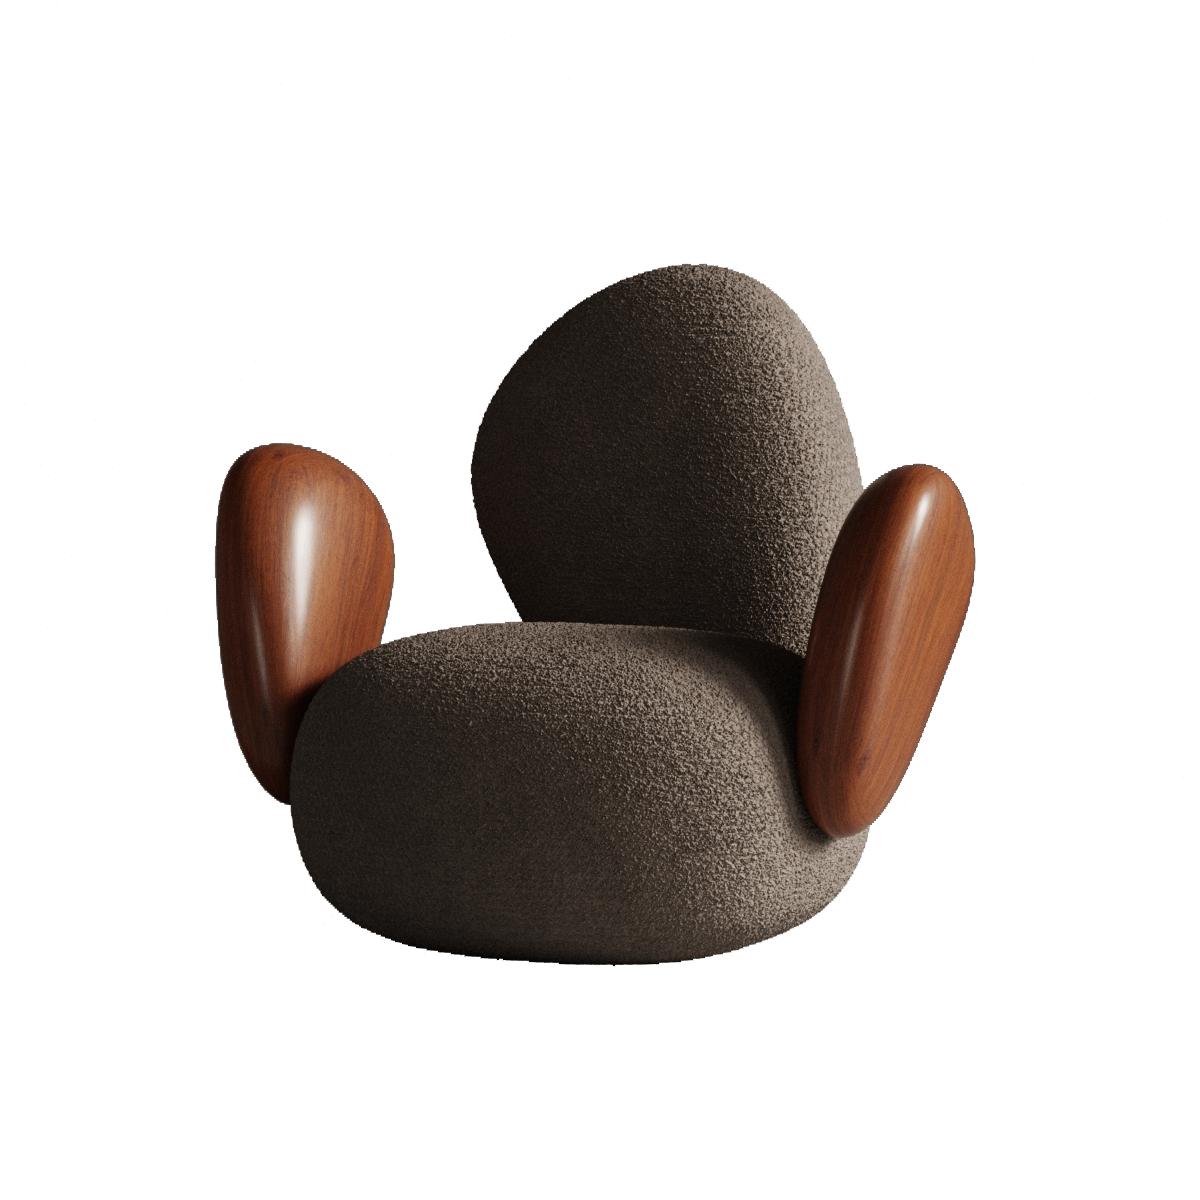 Emirian Stone Chair by Plyus Design For Sale